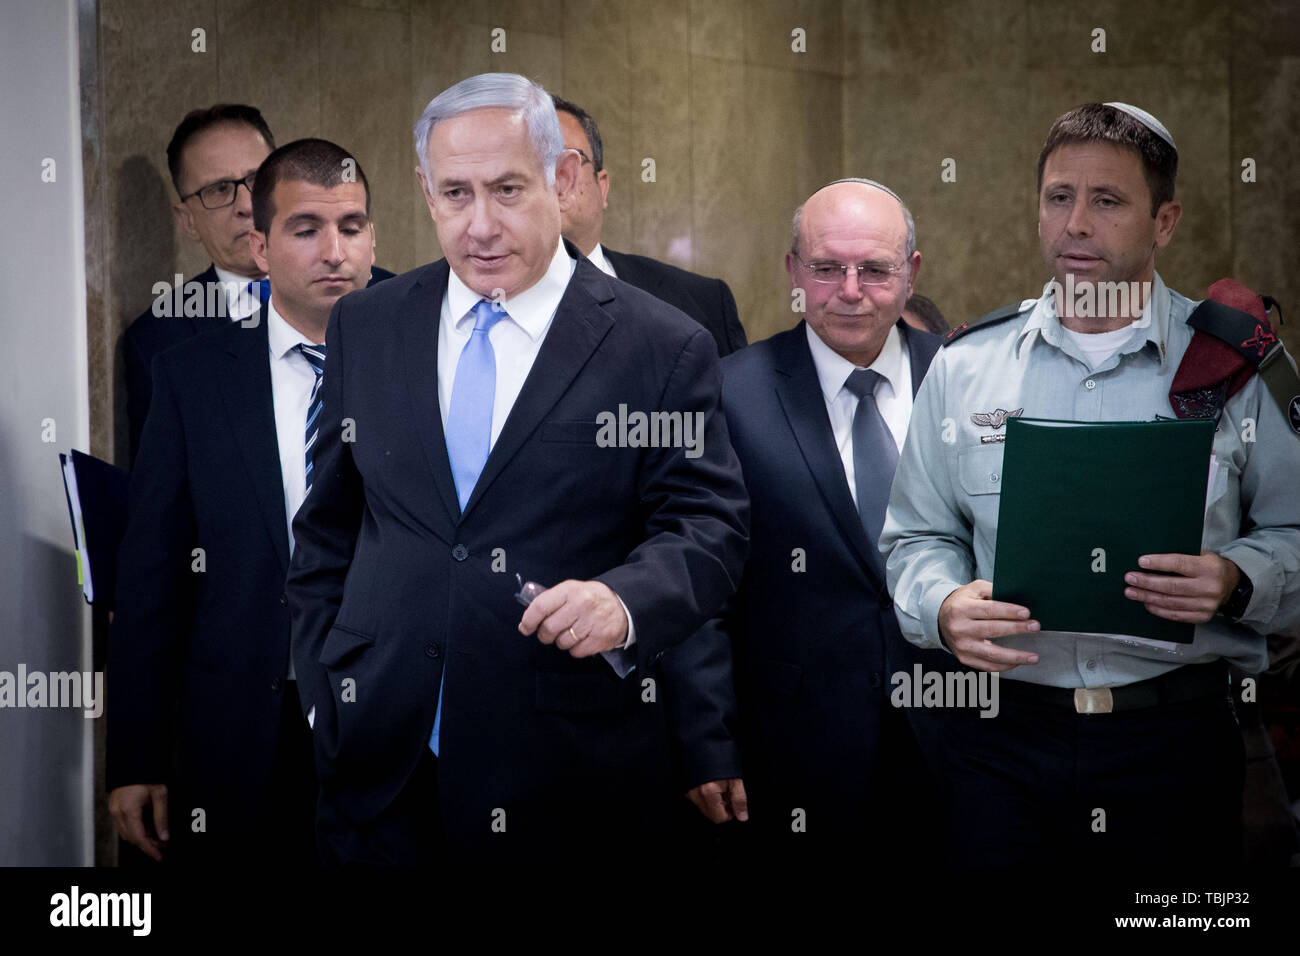 Jerusalem. 2nd June, 2019. Israeli Prime Minister Benjamin Netanyahu (Front) attends the weekly cabinet meeting in Jerusalem, June 2, 2019. The Israeli parliament, known as the Knesset, dissolved itself last Wednesday and scheduled another general election for mid-September of this year. The development came after Israeli Prime Minister Benjamin Netanyahu failed to form a coalition government. Credit: JINI/Yonatan Sindel/Xinhua/Alamy Live News Stock Photo